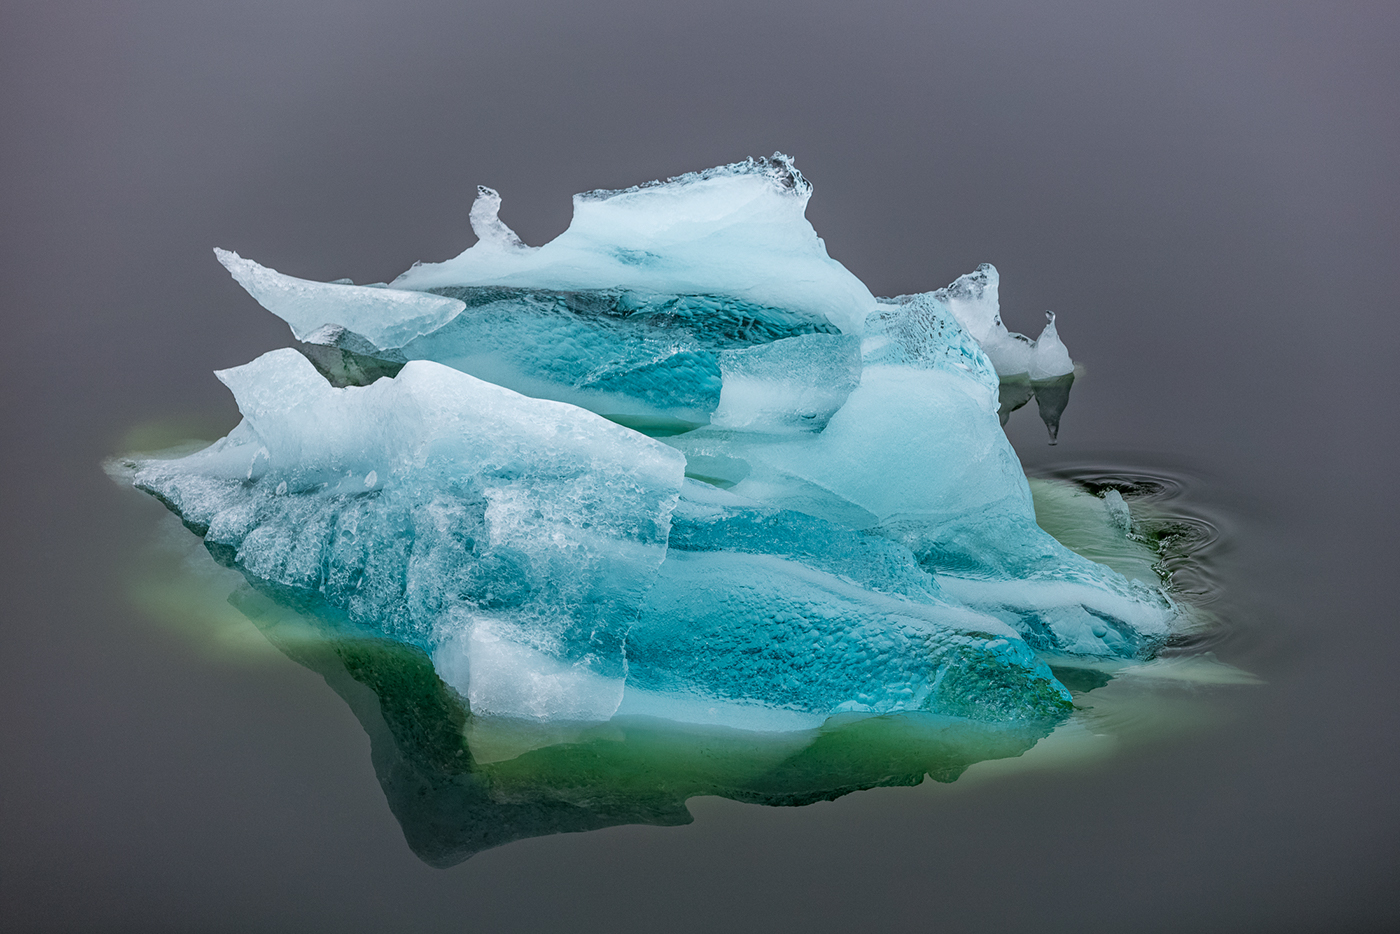 Antarcitca ice reflections icebergs cold stunning remarkable water Ocean